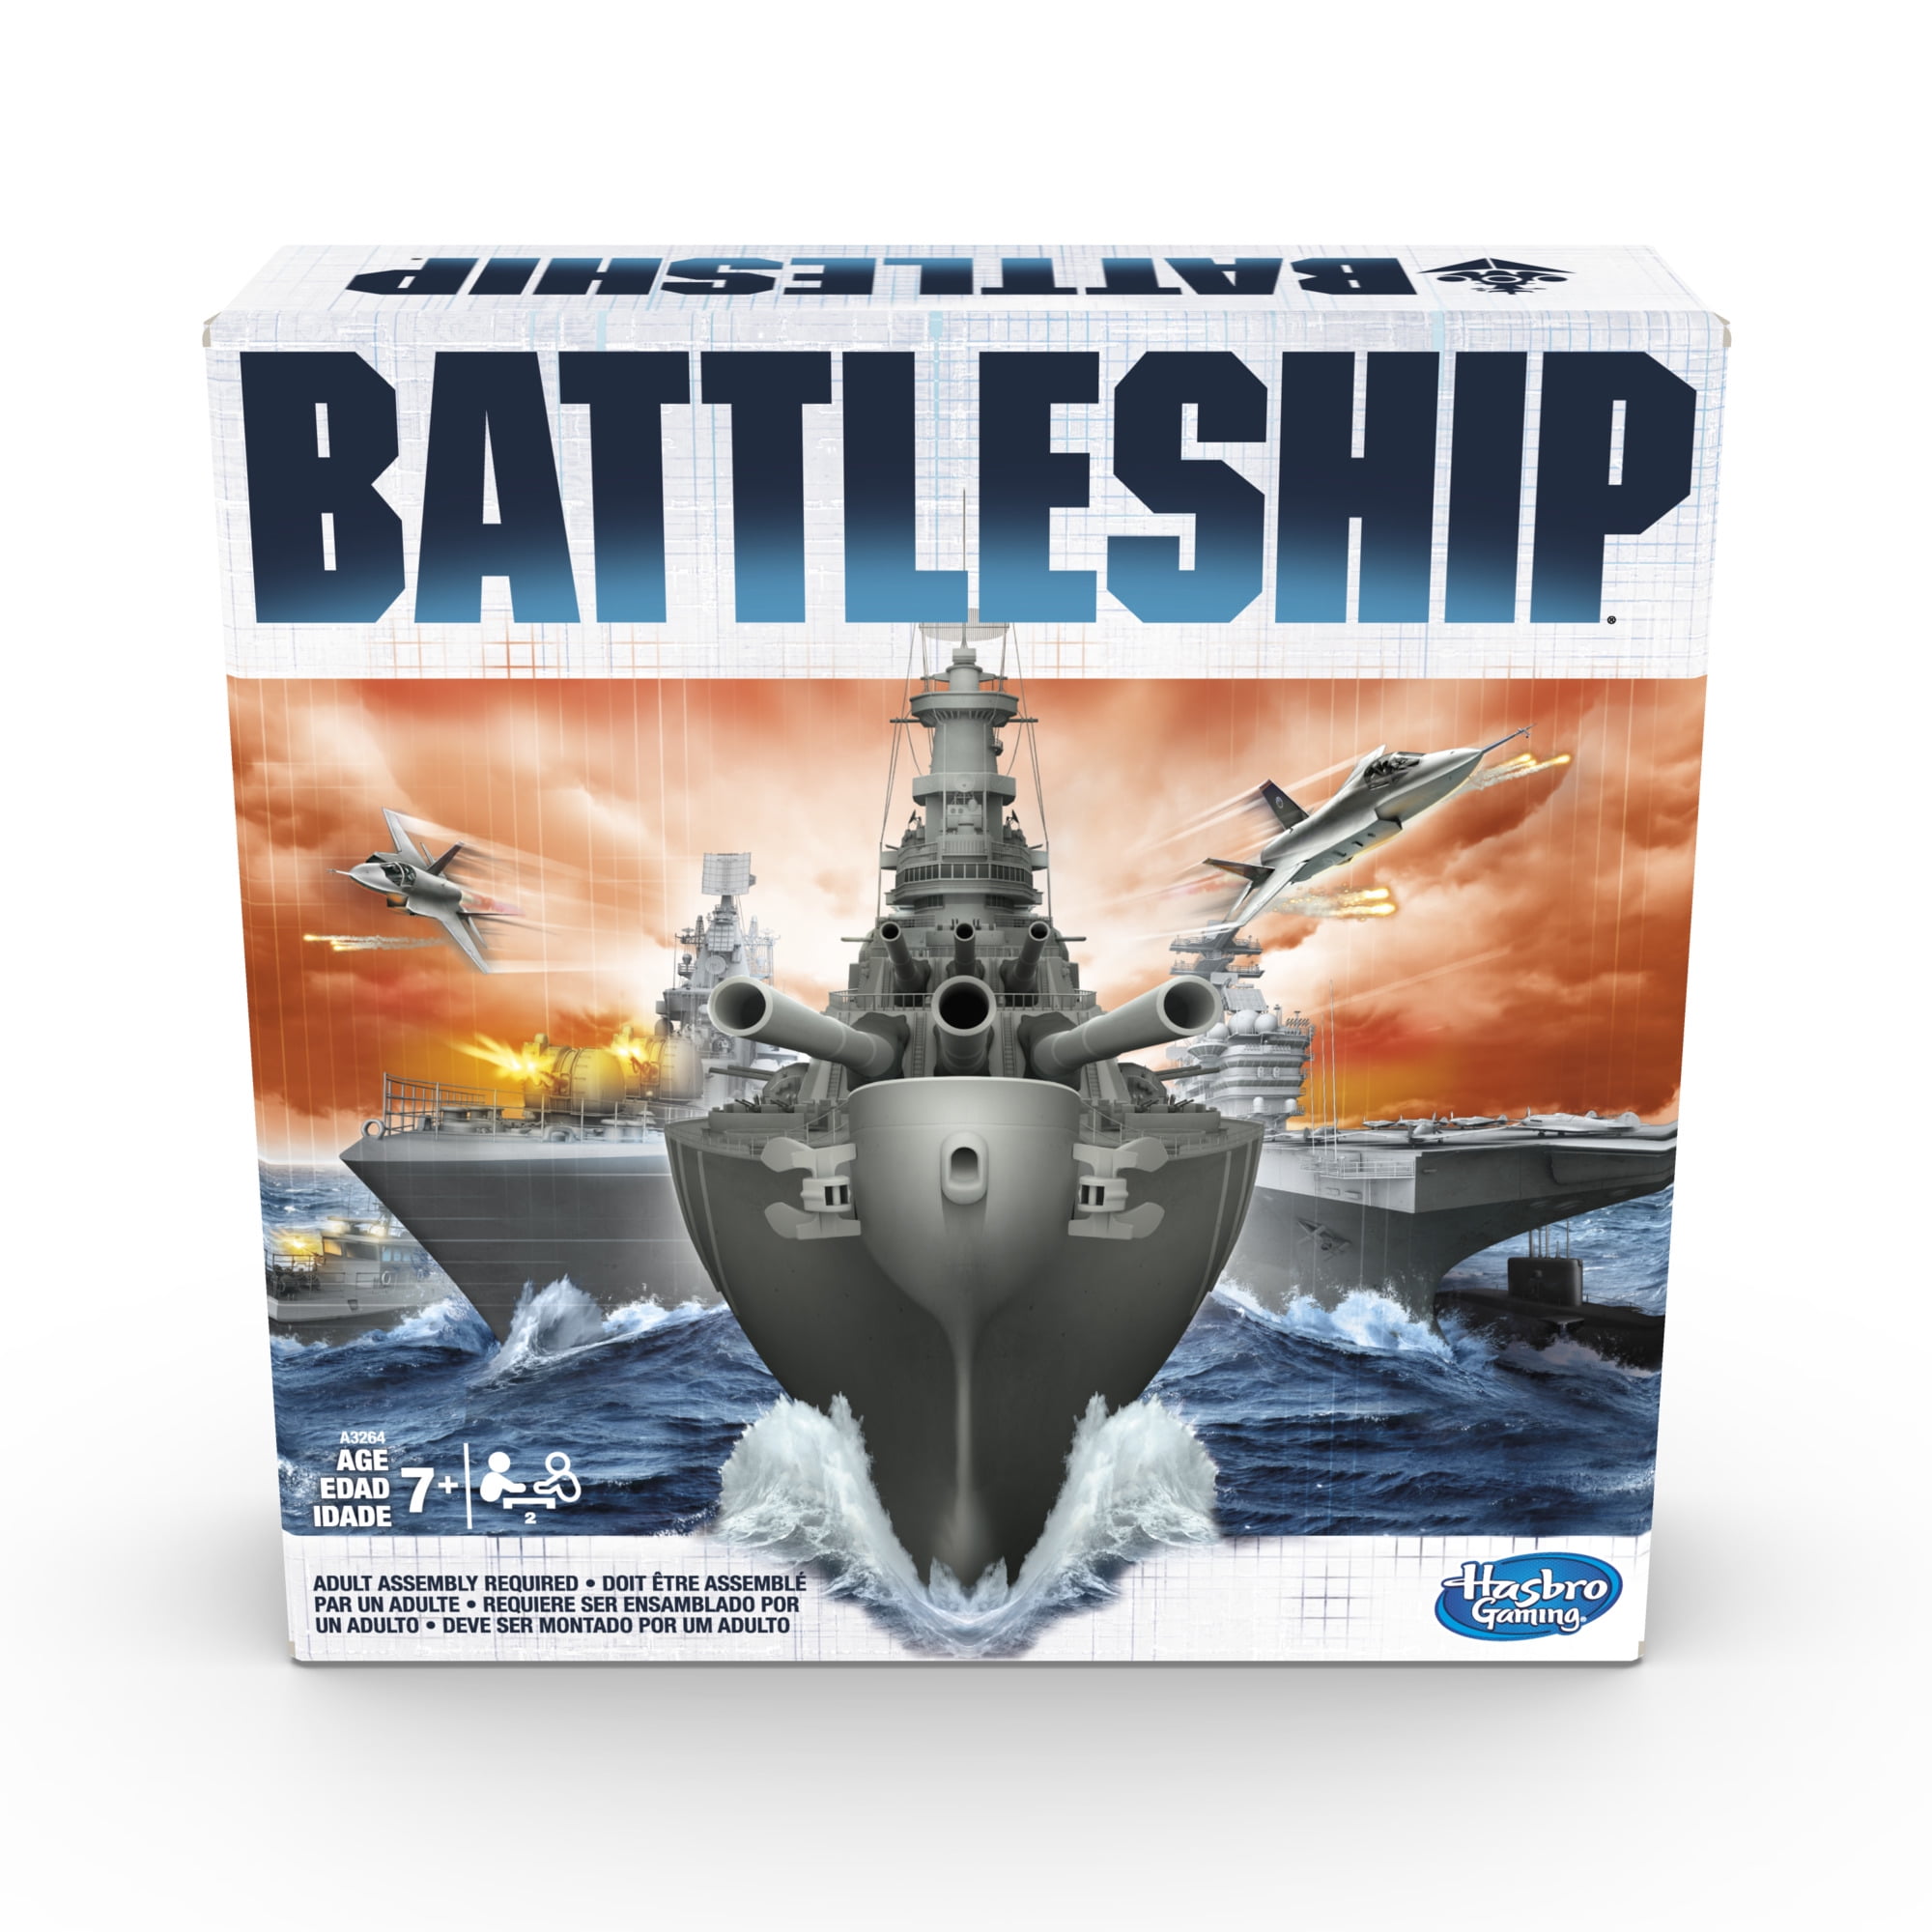 BATTLESHIPS SPARES~ USE DROP DOWN LIST ~ COMBINED POSTAGE COMPUTER BATTLESHIPS 